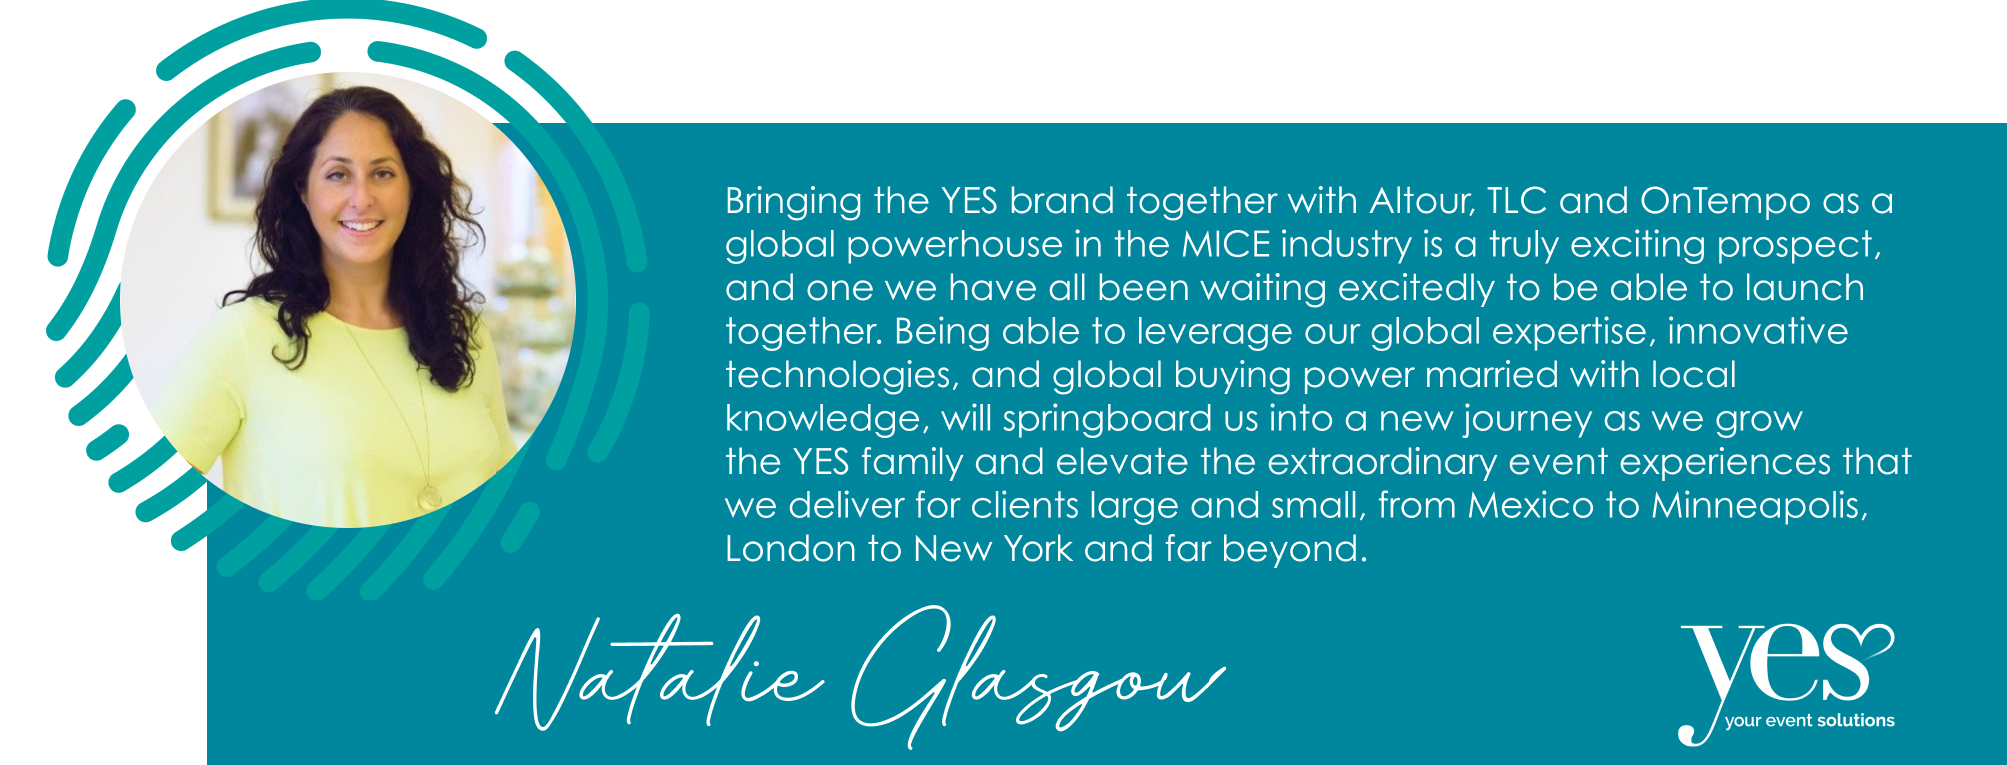 Bringing the YES brand together with Altour, TLC and OnTempo as a global powerhouse in the MICE industry is a truly exciting prospect, and one we have all been waiting excitedly to be able to launch together. Being able to leverage our global expertise, innovative technologies, and global buying power married with local knowledge, will springboard us into a new journey as we grow  the YES family and elevate the extraordinary event experiences that we deliver for clients large and small, from Mexico to Minneapolis, London to New York and far beyond.